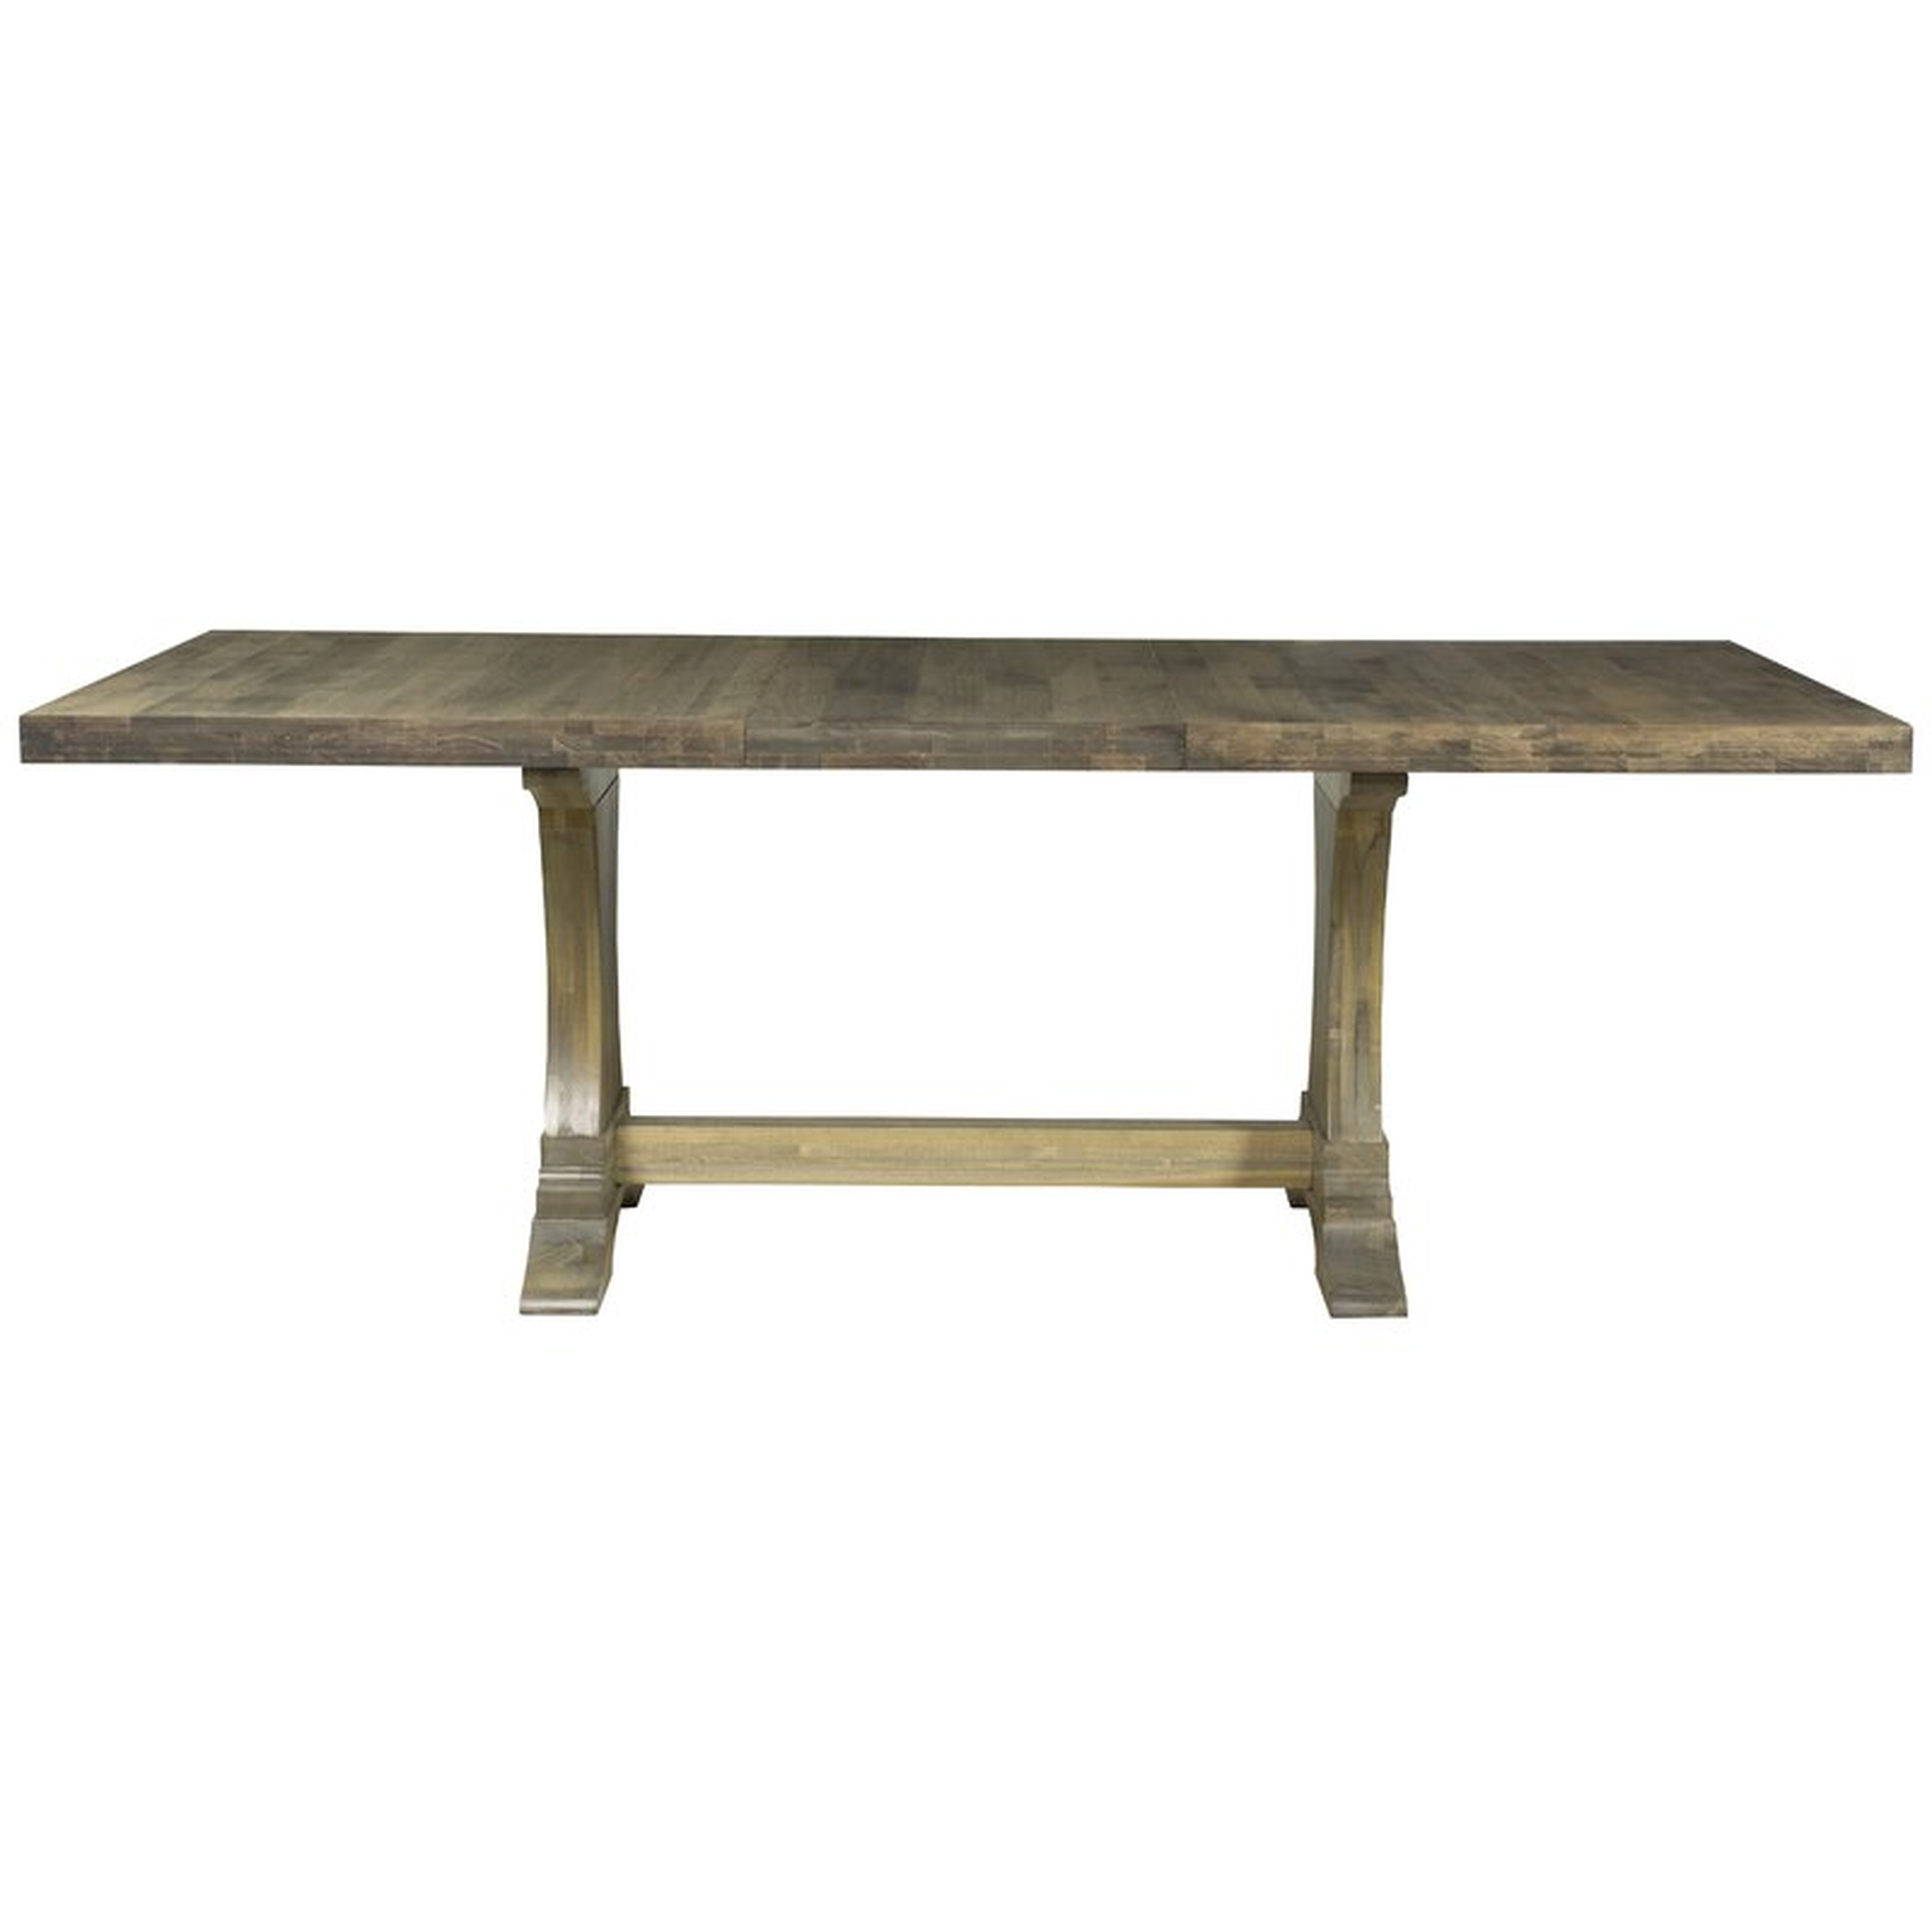 Cheshire Maple Dining Table Color: Distressed Flax, Size: 29.75" H x 96" W x 42" D - Perigold